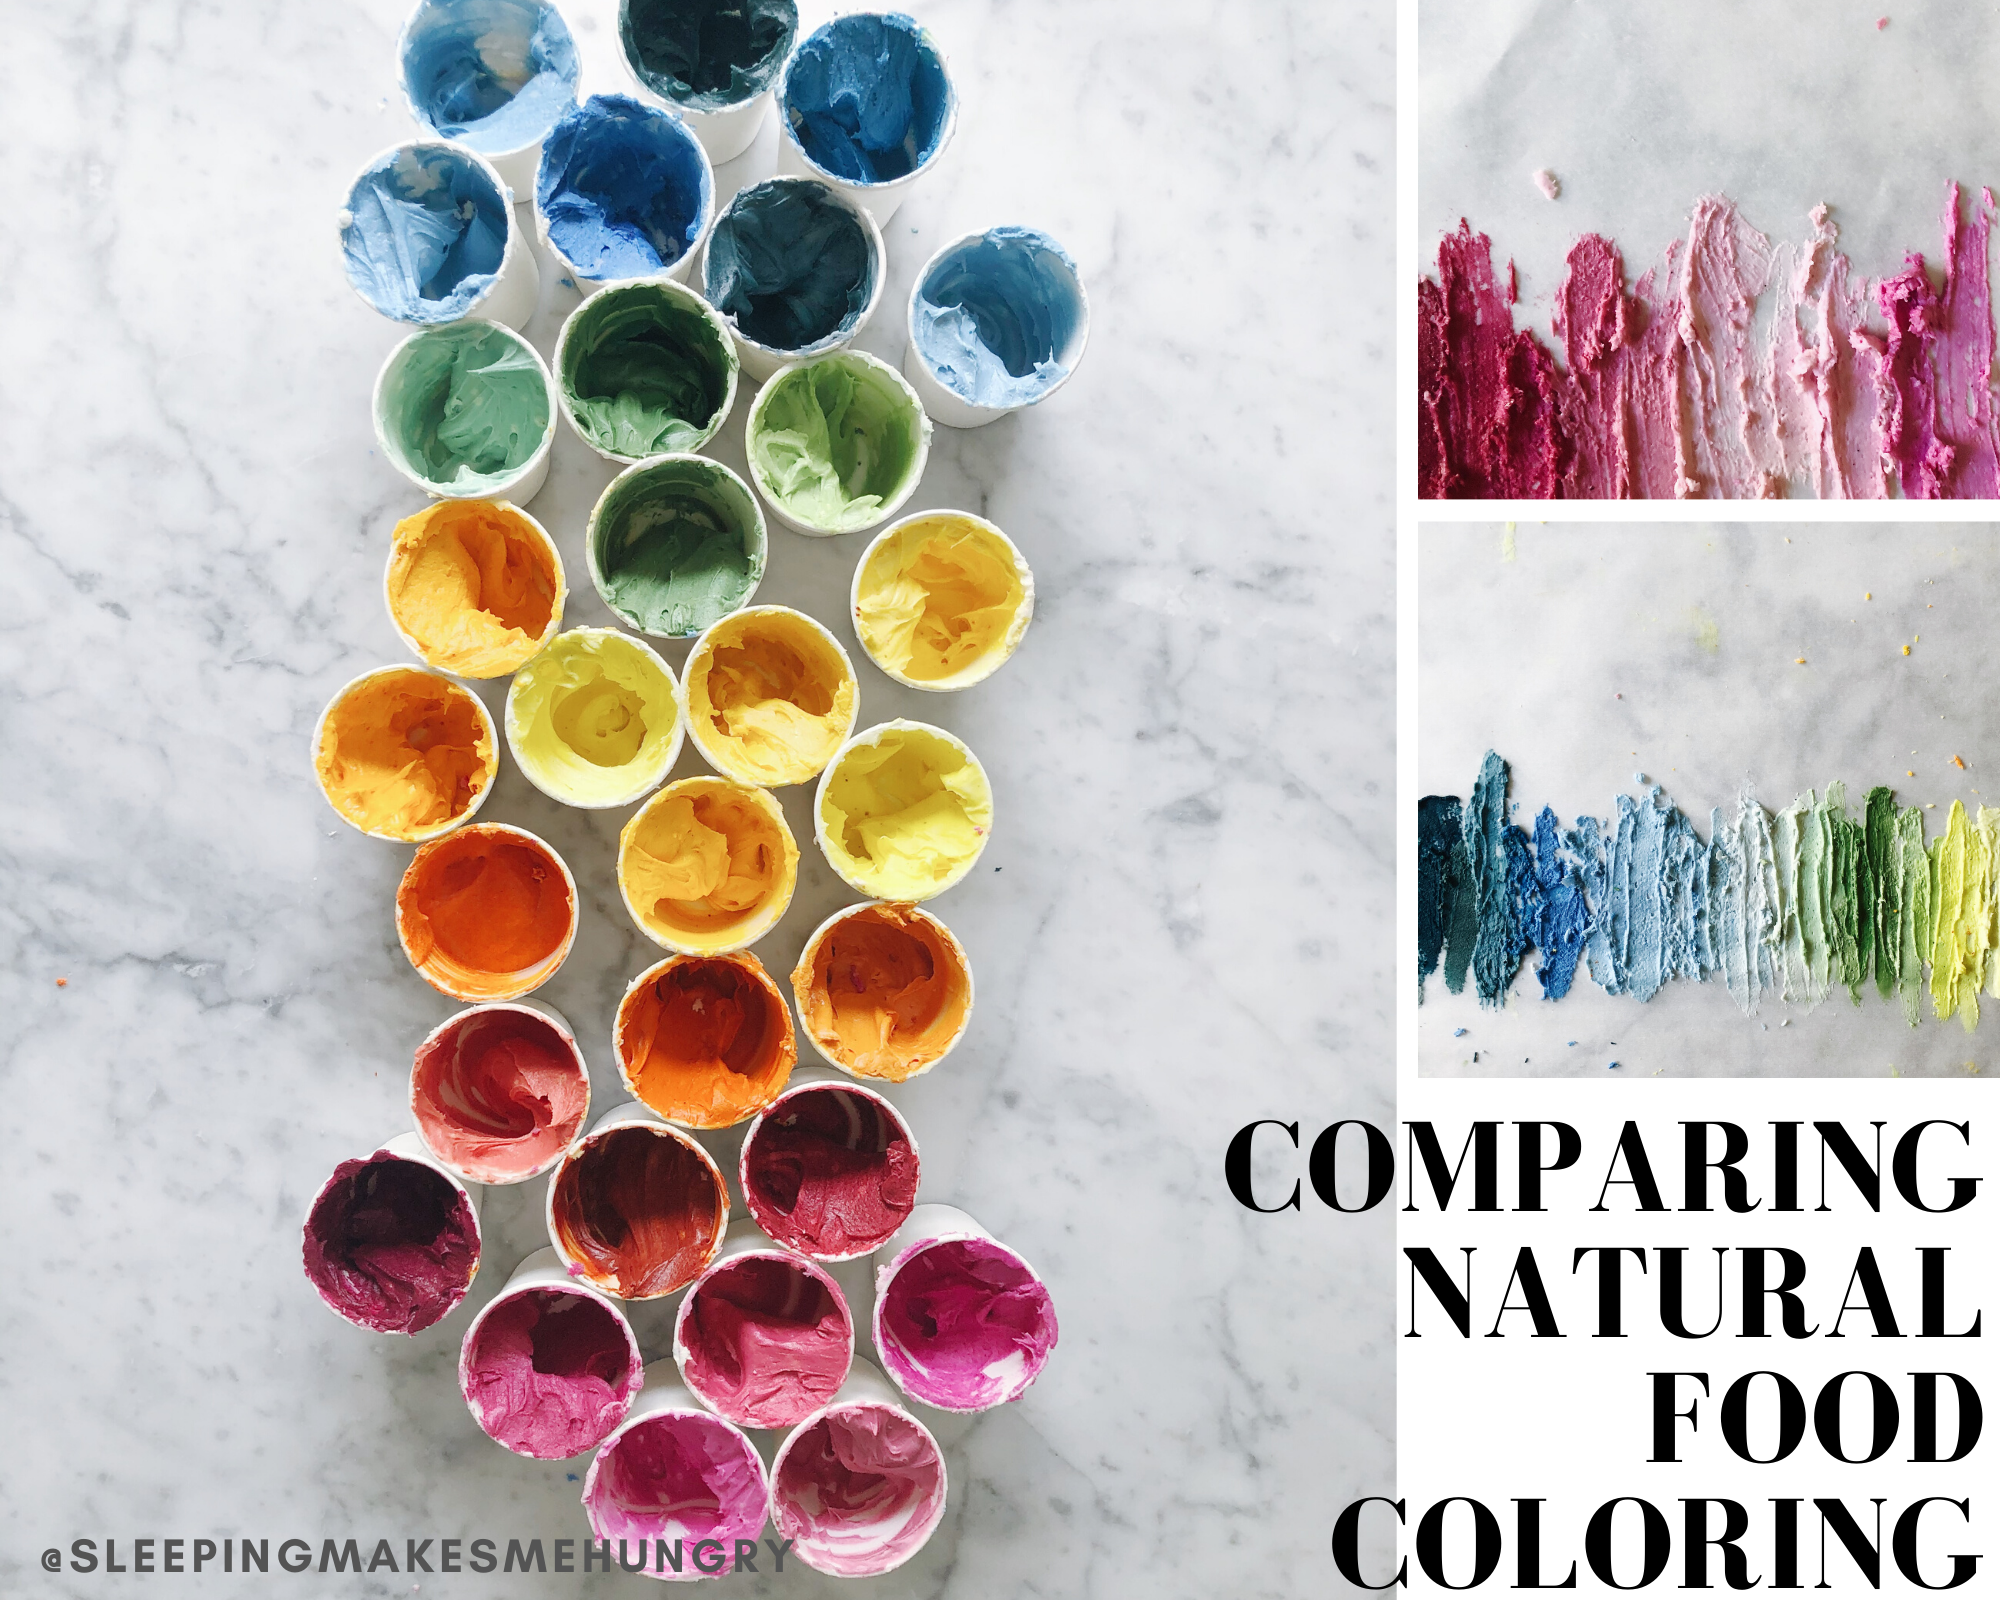 Gluten Free Food Coloring Brands and Homemade